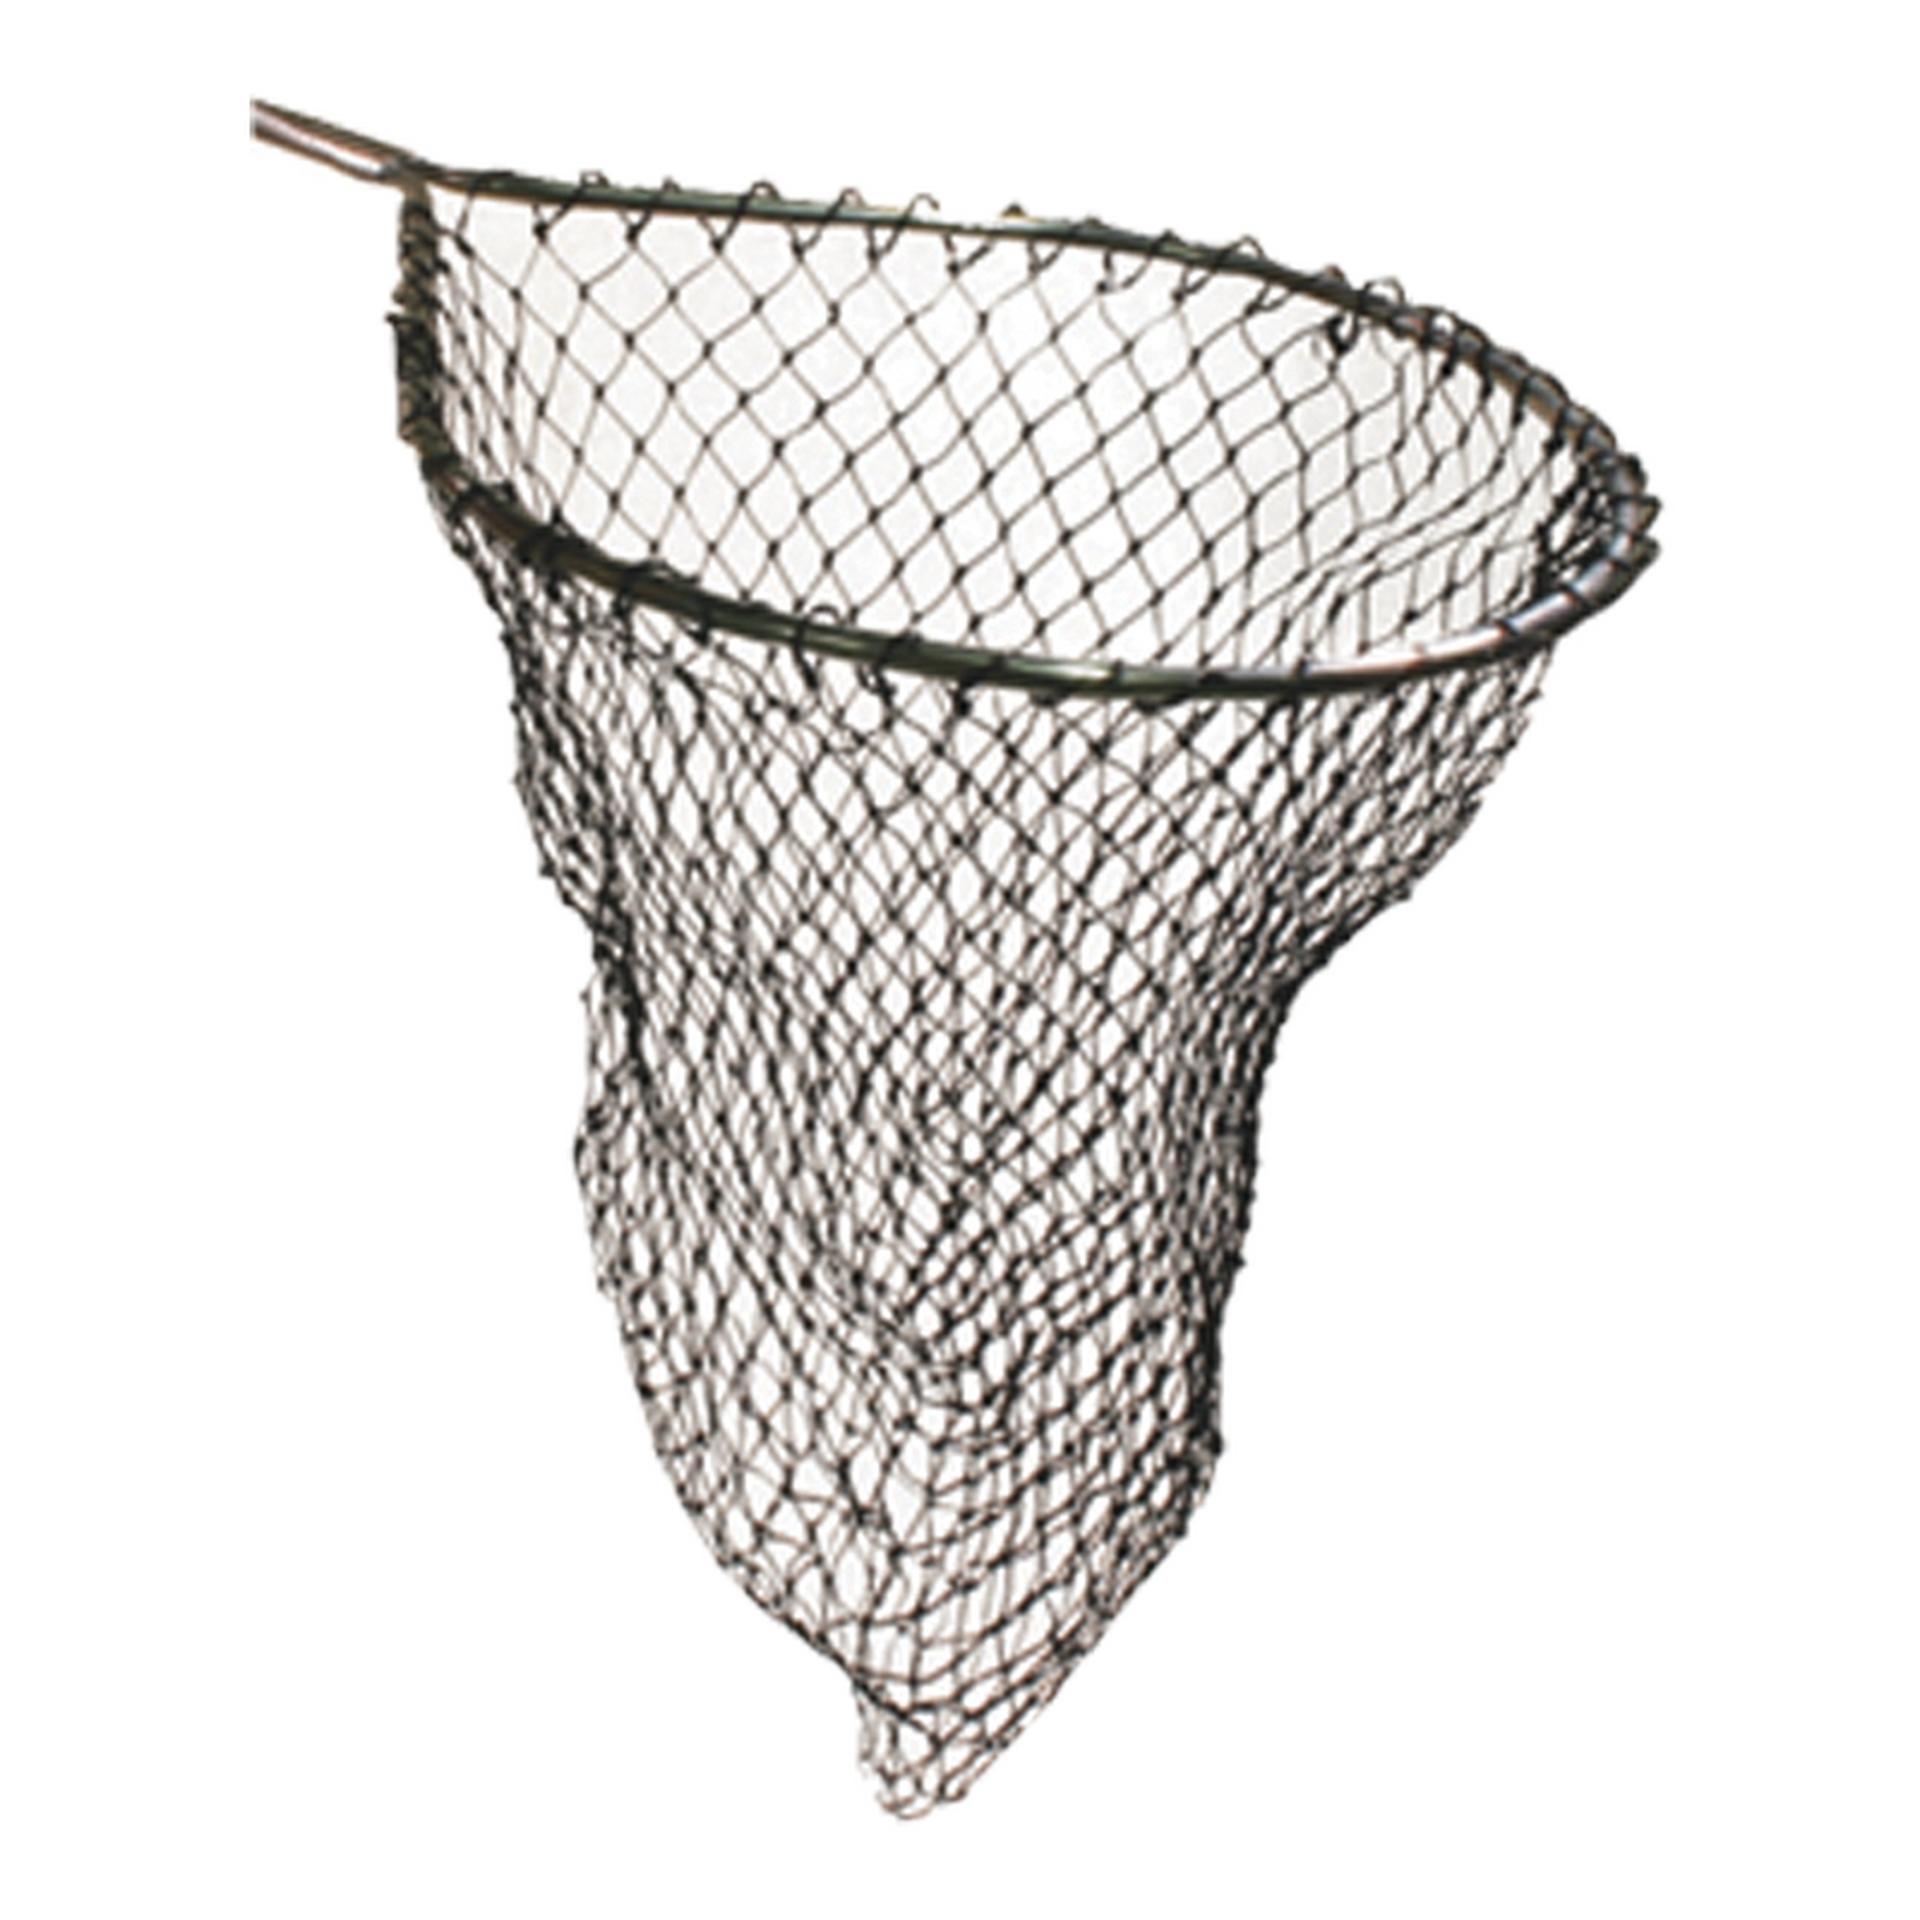 Frabill Fishing Net for sale 47 ads for used Frabill Fishing Nets